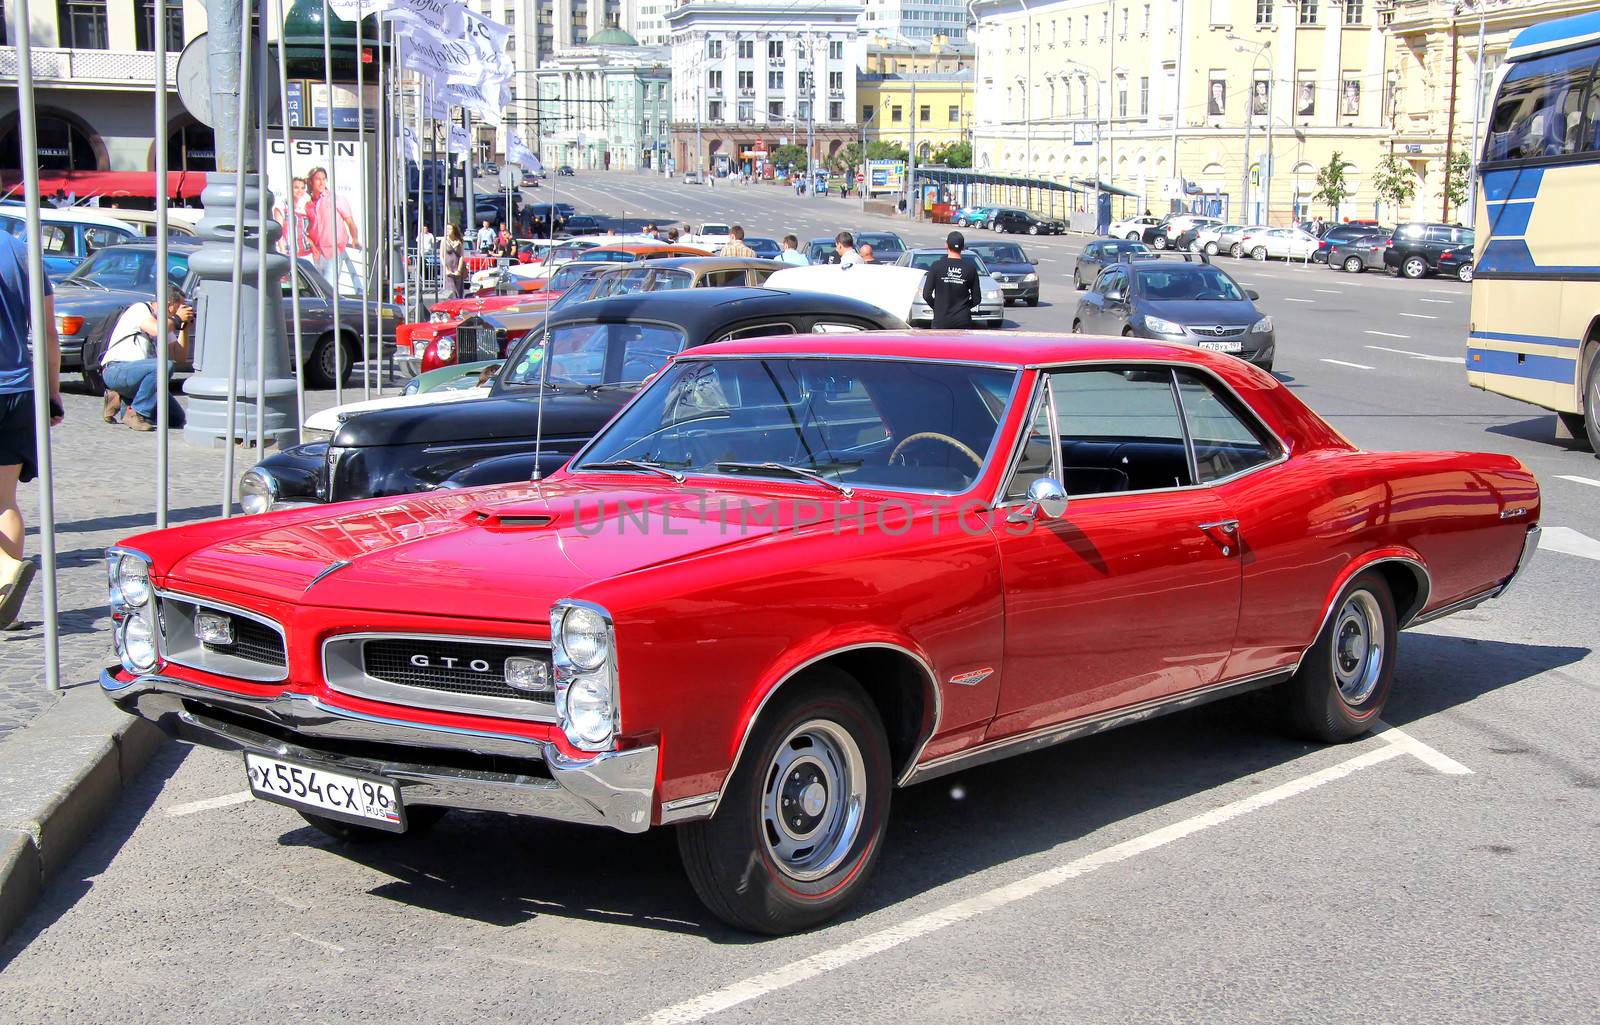 MOSCOW, RUSSIA - JUNE 2: American motor car Pontiac GTO competes at the annual L.U.C. Chopard Classic Weekend Rally on June 2, 2013 in Moscow, Russia.